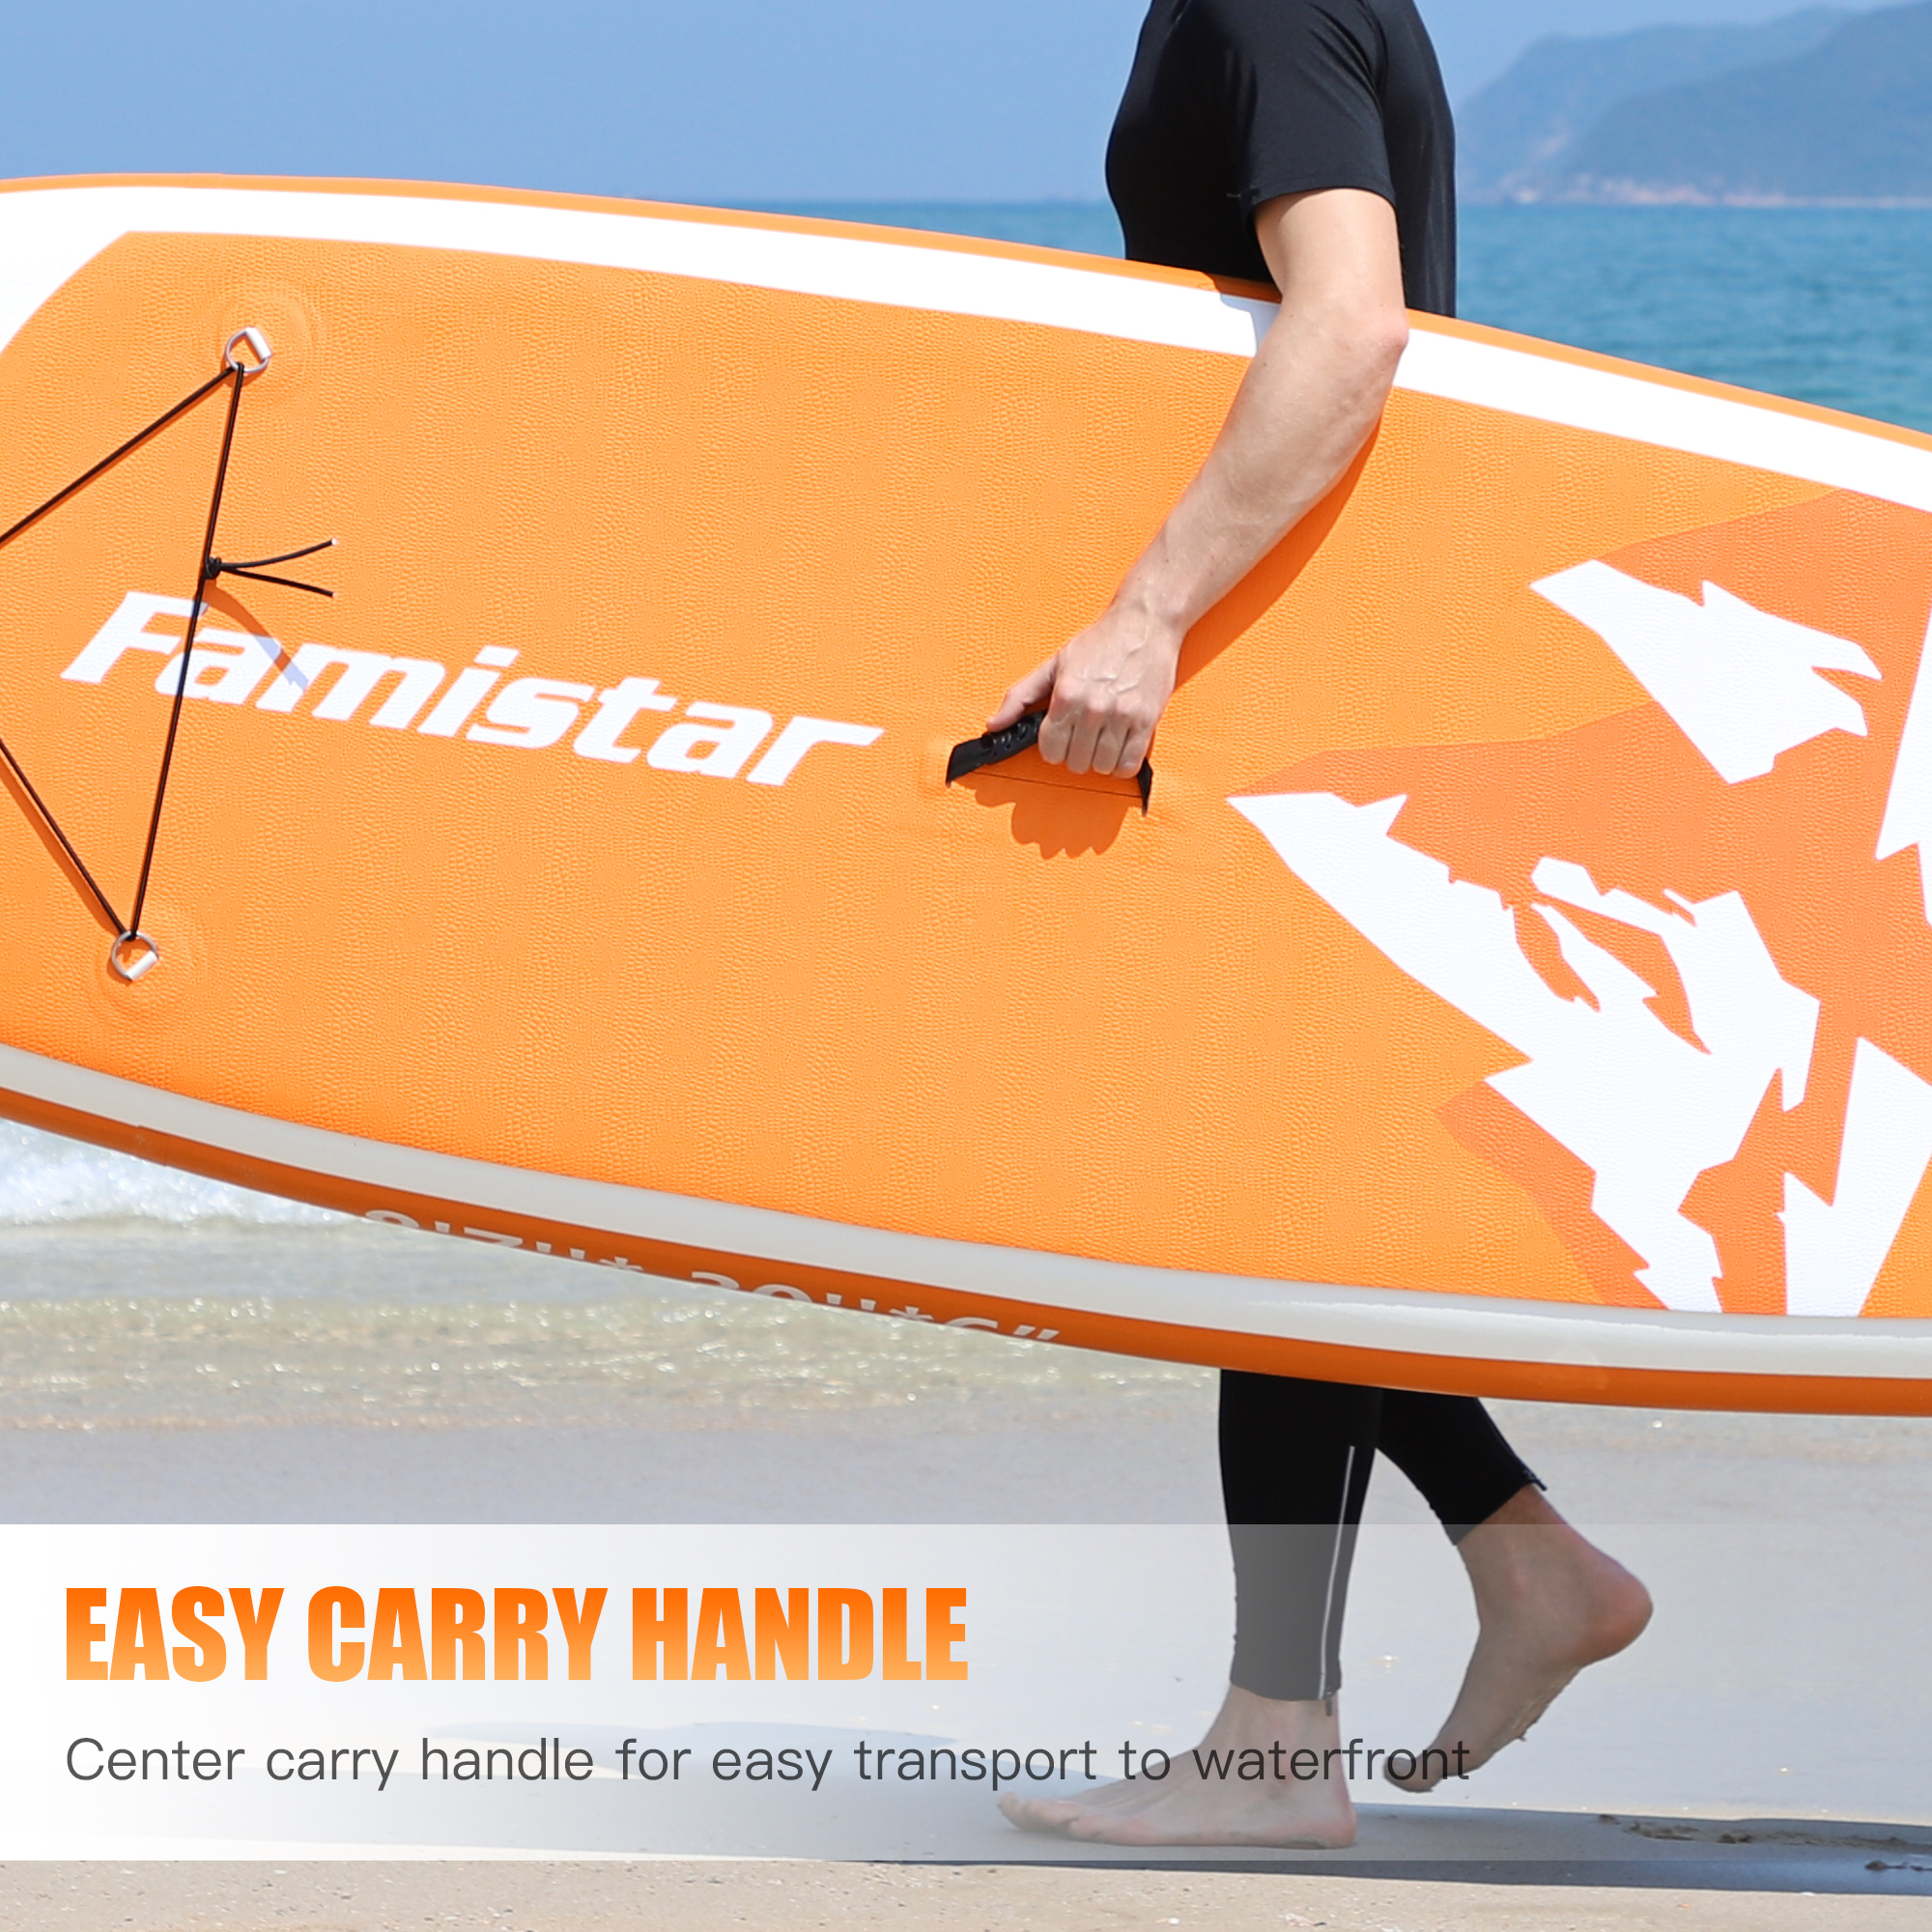 Famistar 8'7" Inflatable Stand Up Paddle Board SUP w/ 3 Fins, Adjustable Paddle, Pump & Carrying Backpack - image 5 of 13